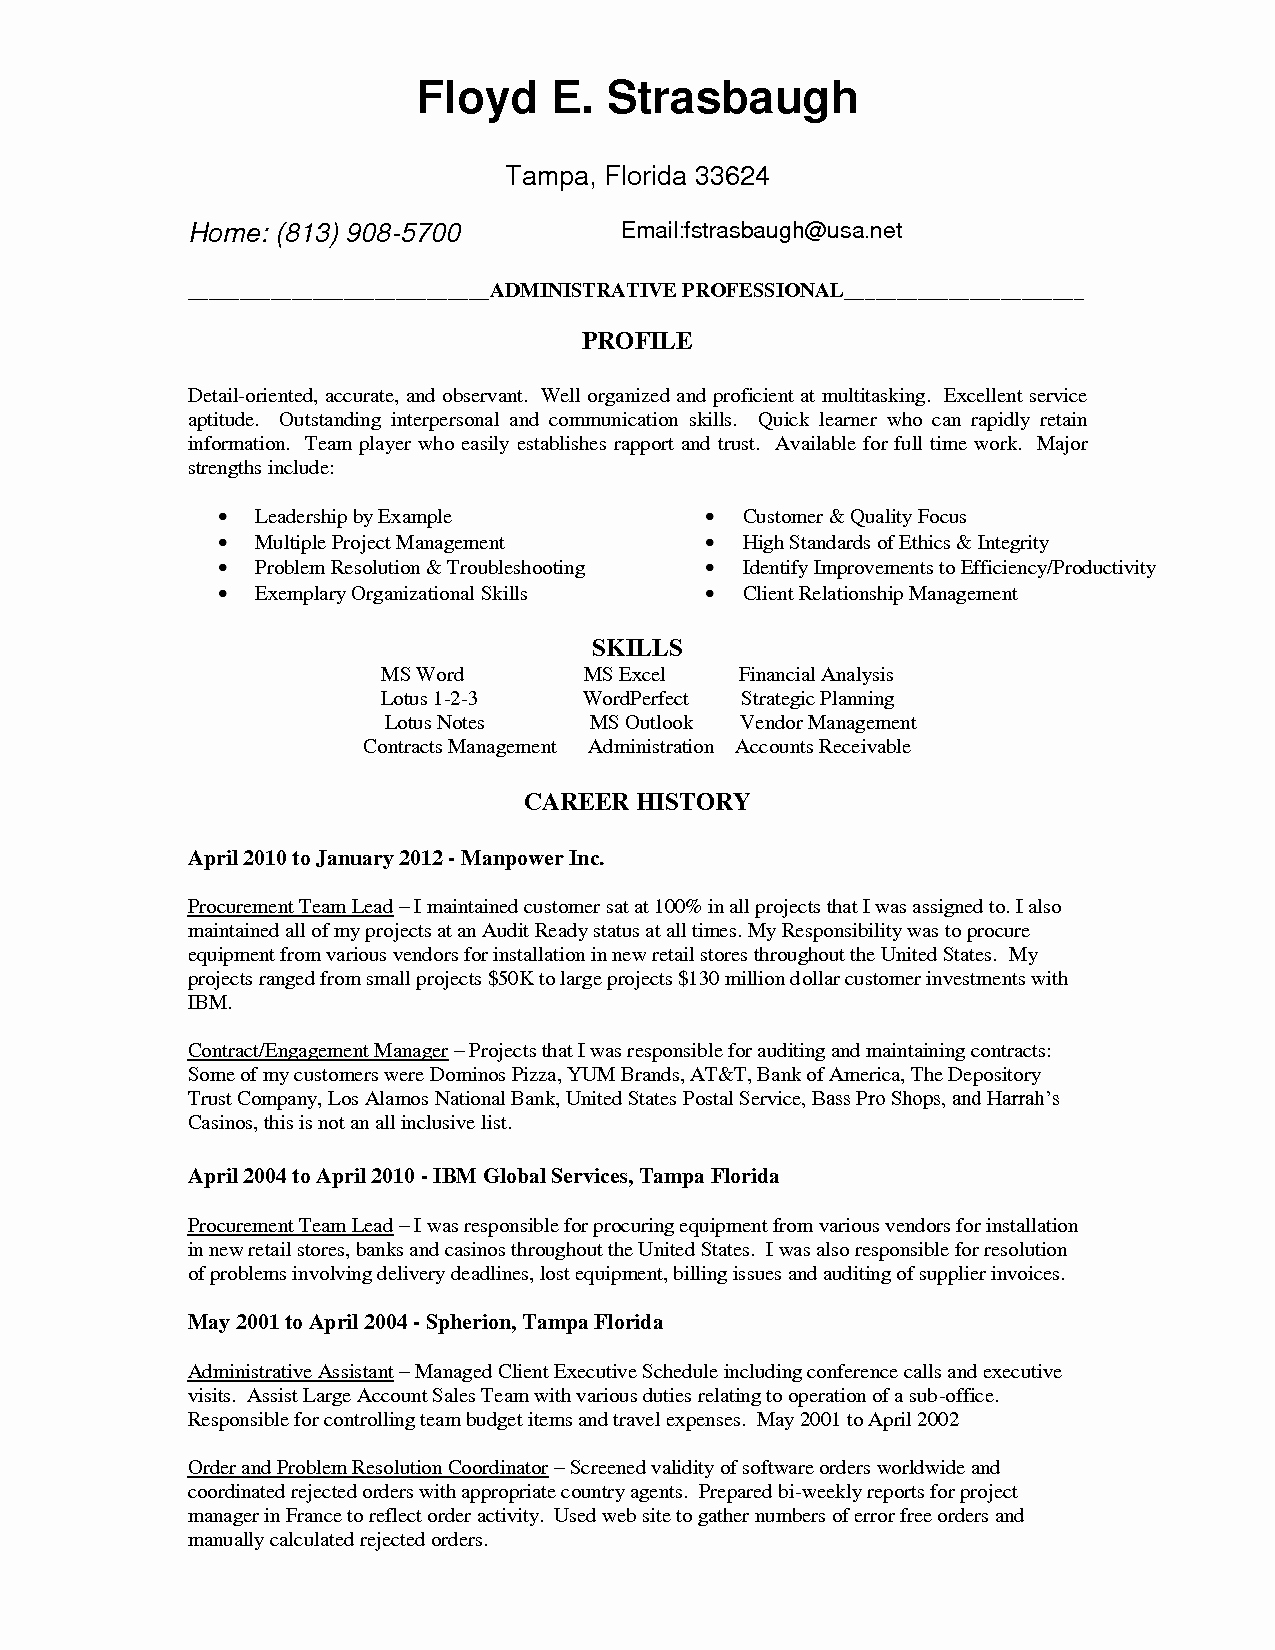 Cover Letter Template Accounting - Accounting Cover Letter Examples Unique Business Cover Letter